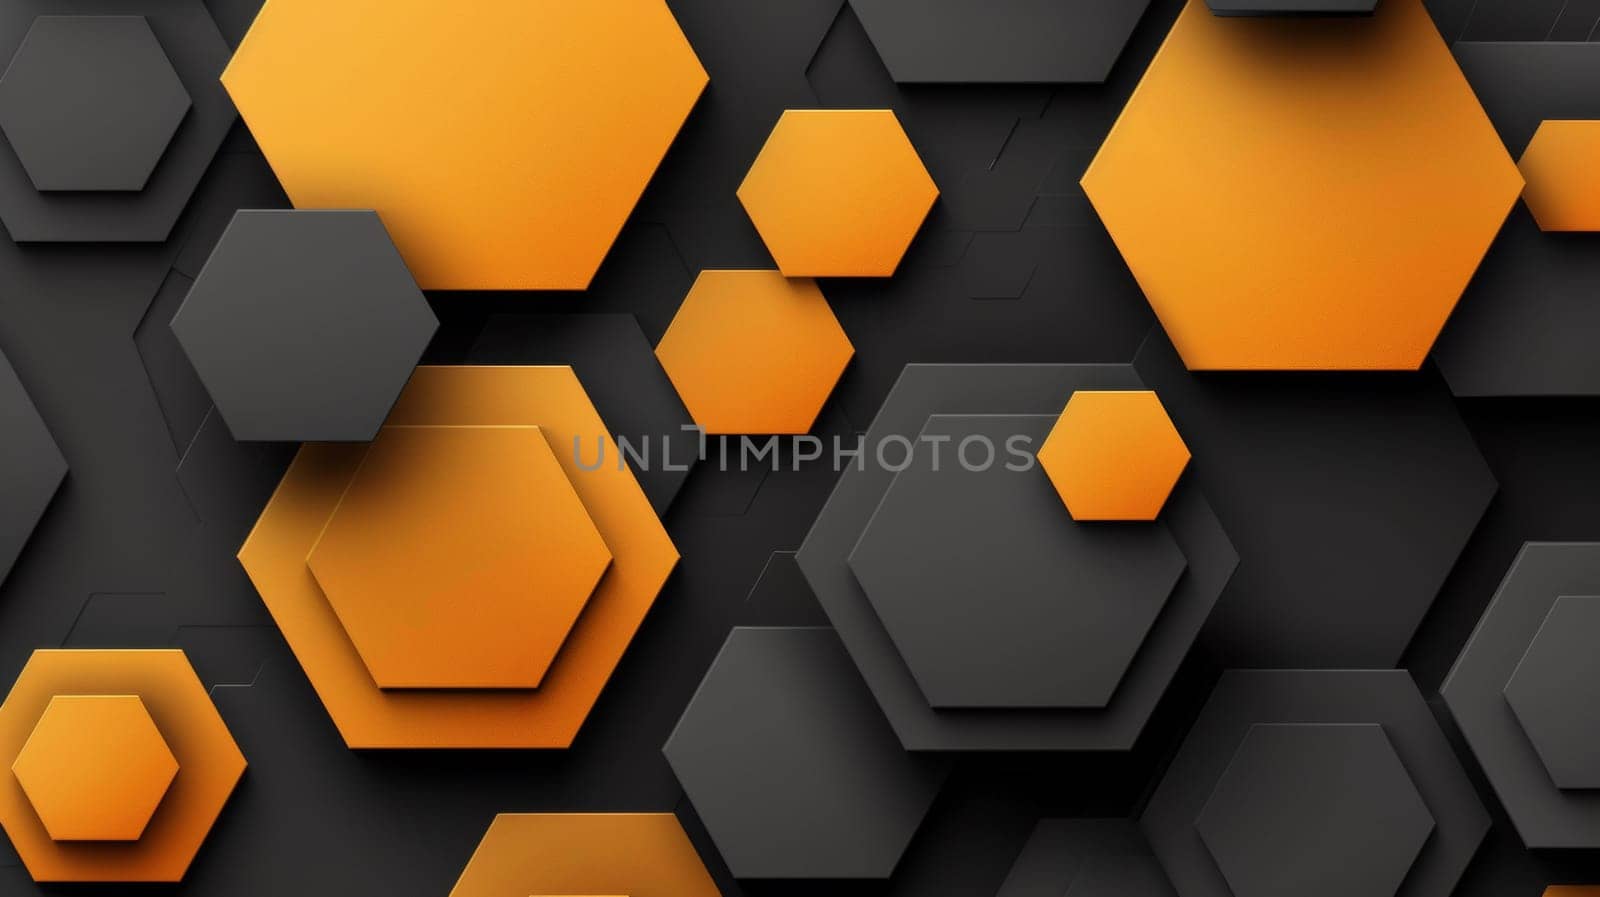 A black and orange background with many hexagons on it